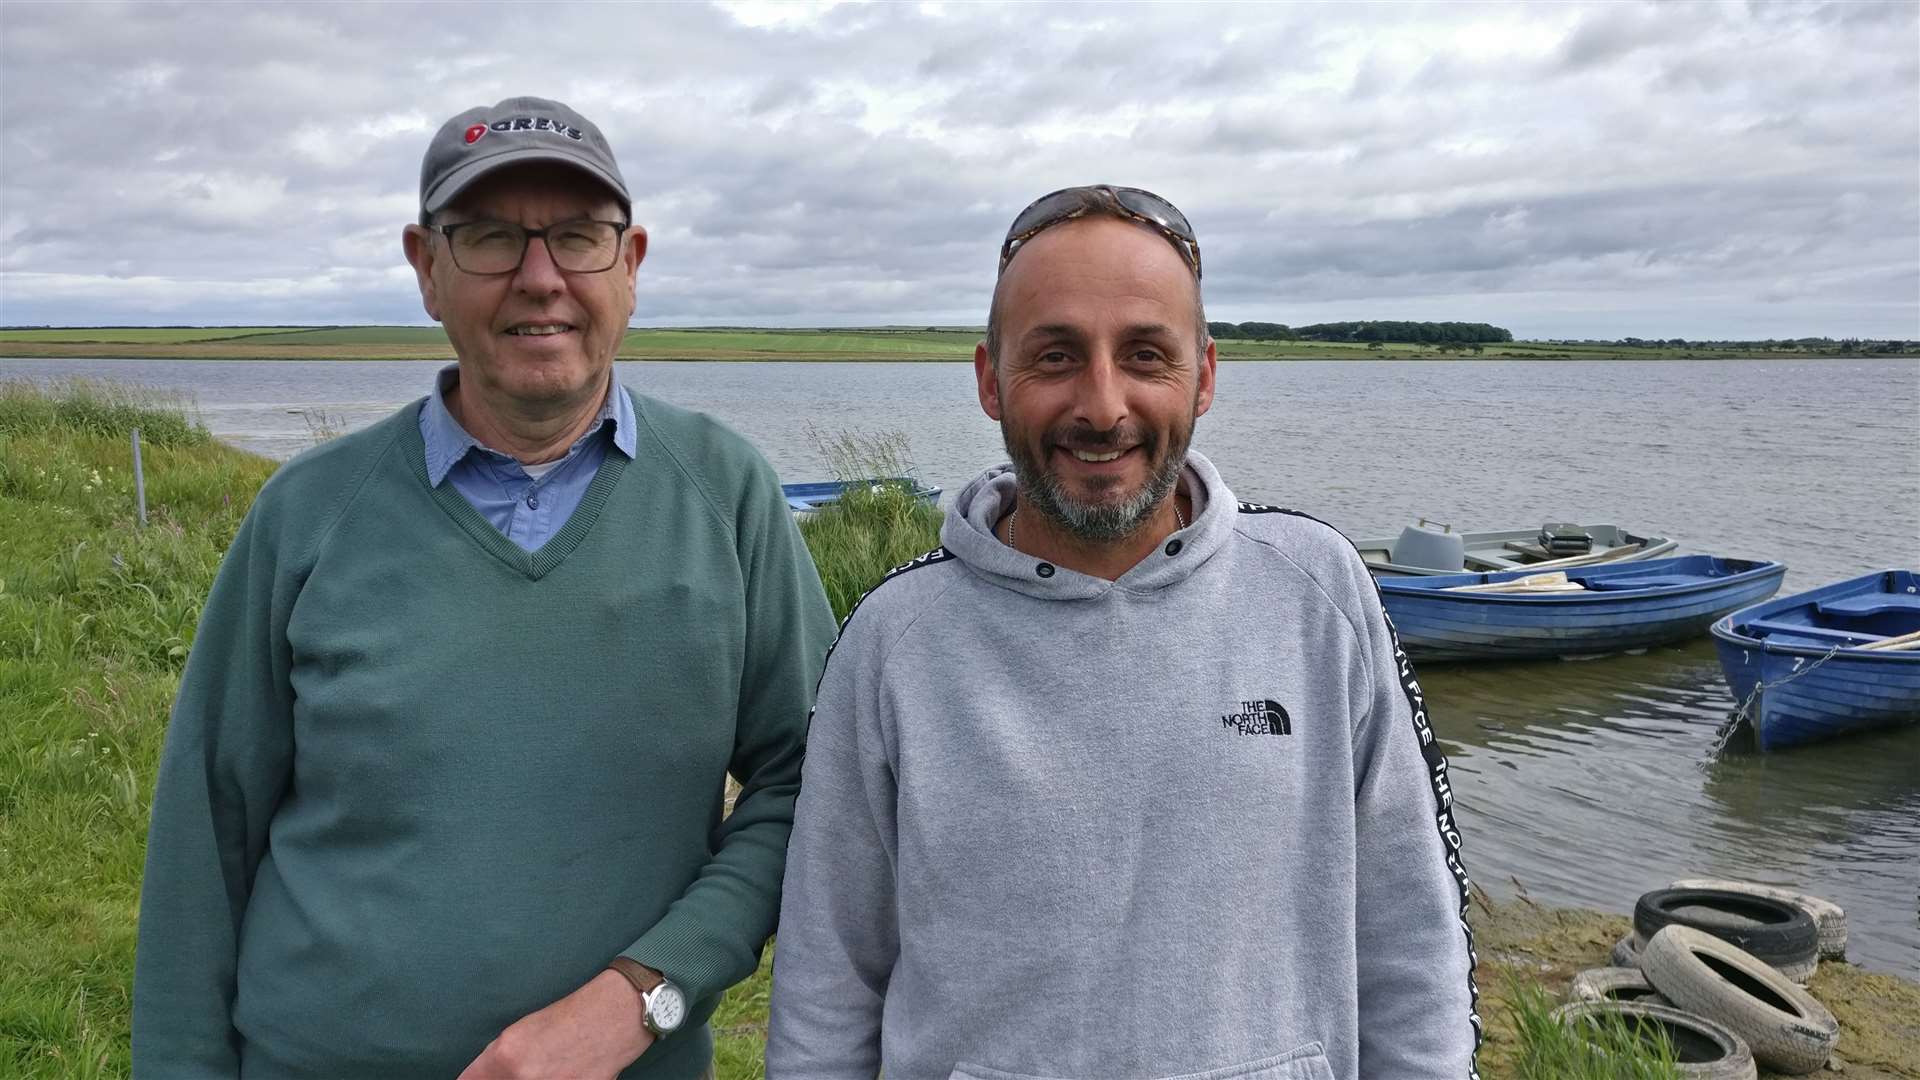 Early Bird competition winner Kevin Imlach (right) with Peter Creasey, who had the best fish of the morning.